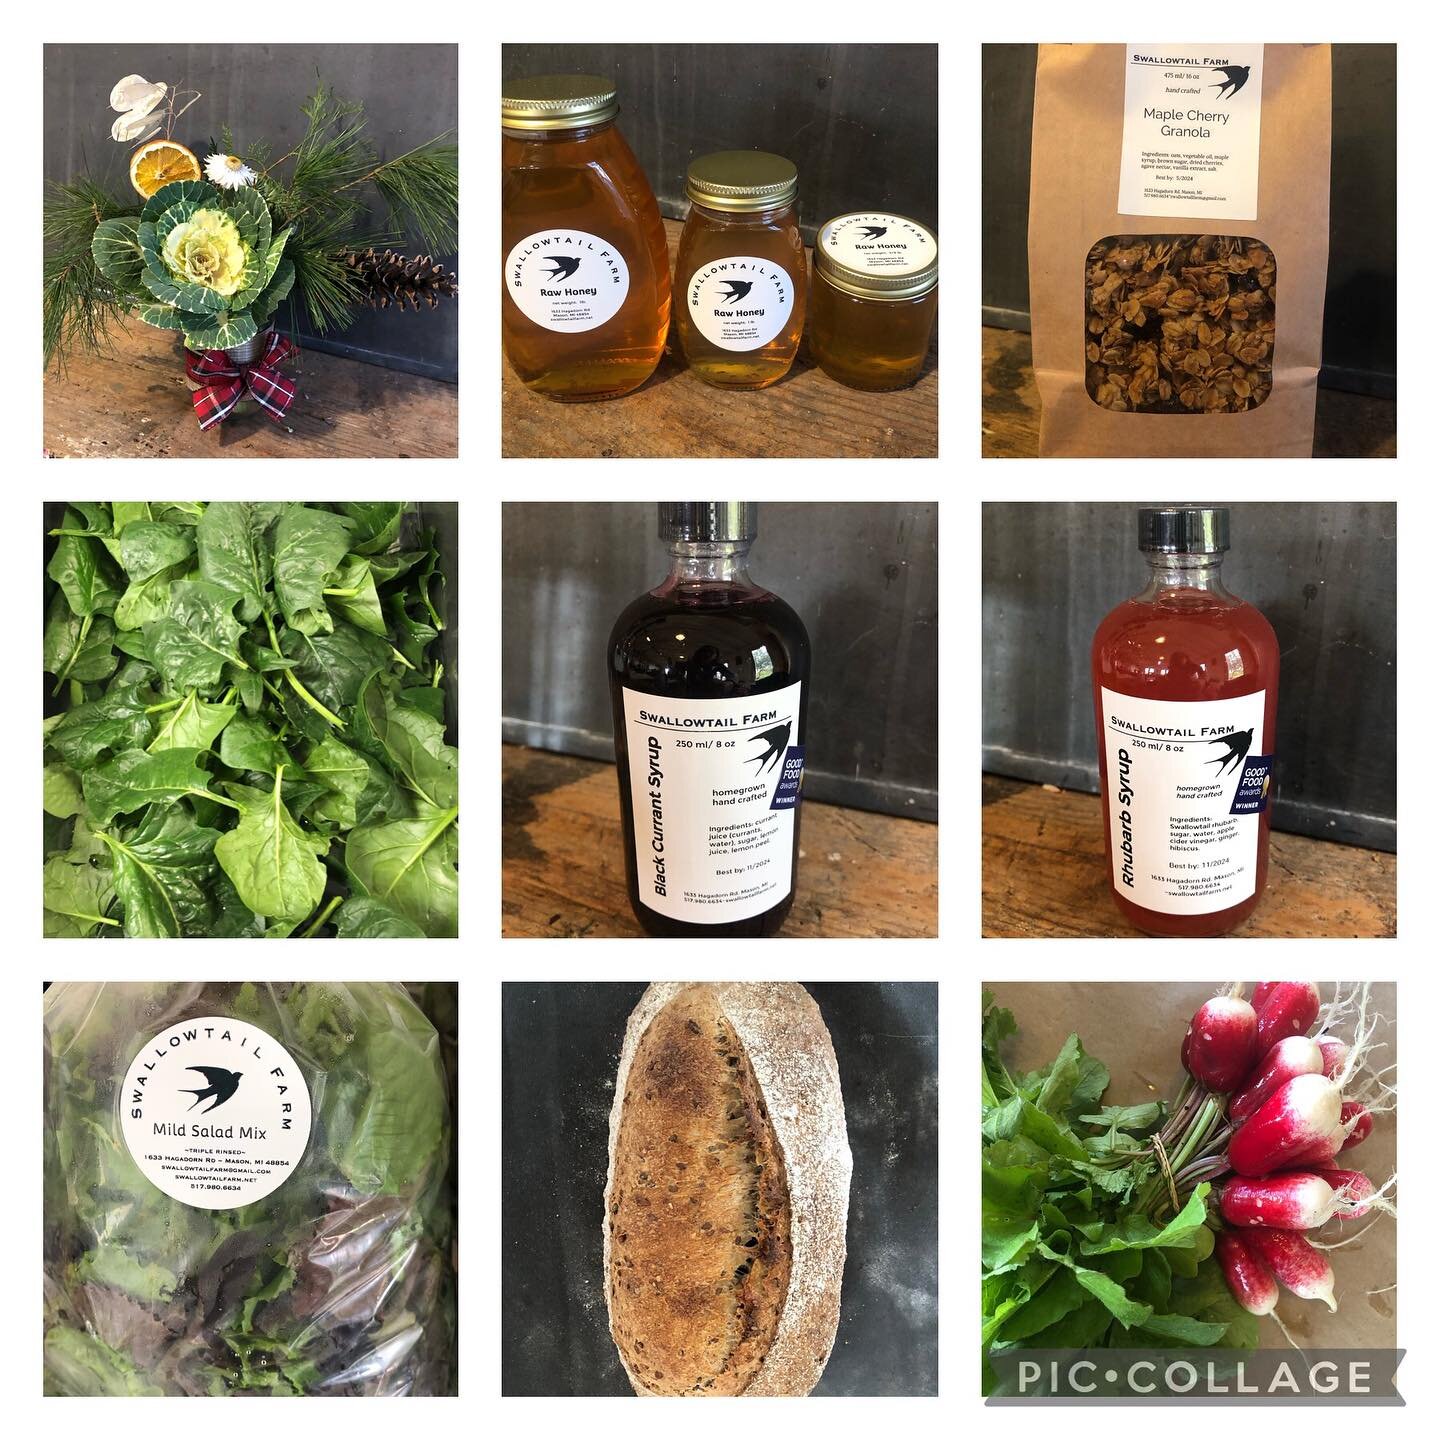 Available this week in the farmstand or preorders open until midnight tonight for Tuesday pick up at swallowtailfarm.net (click on order produce button)